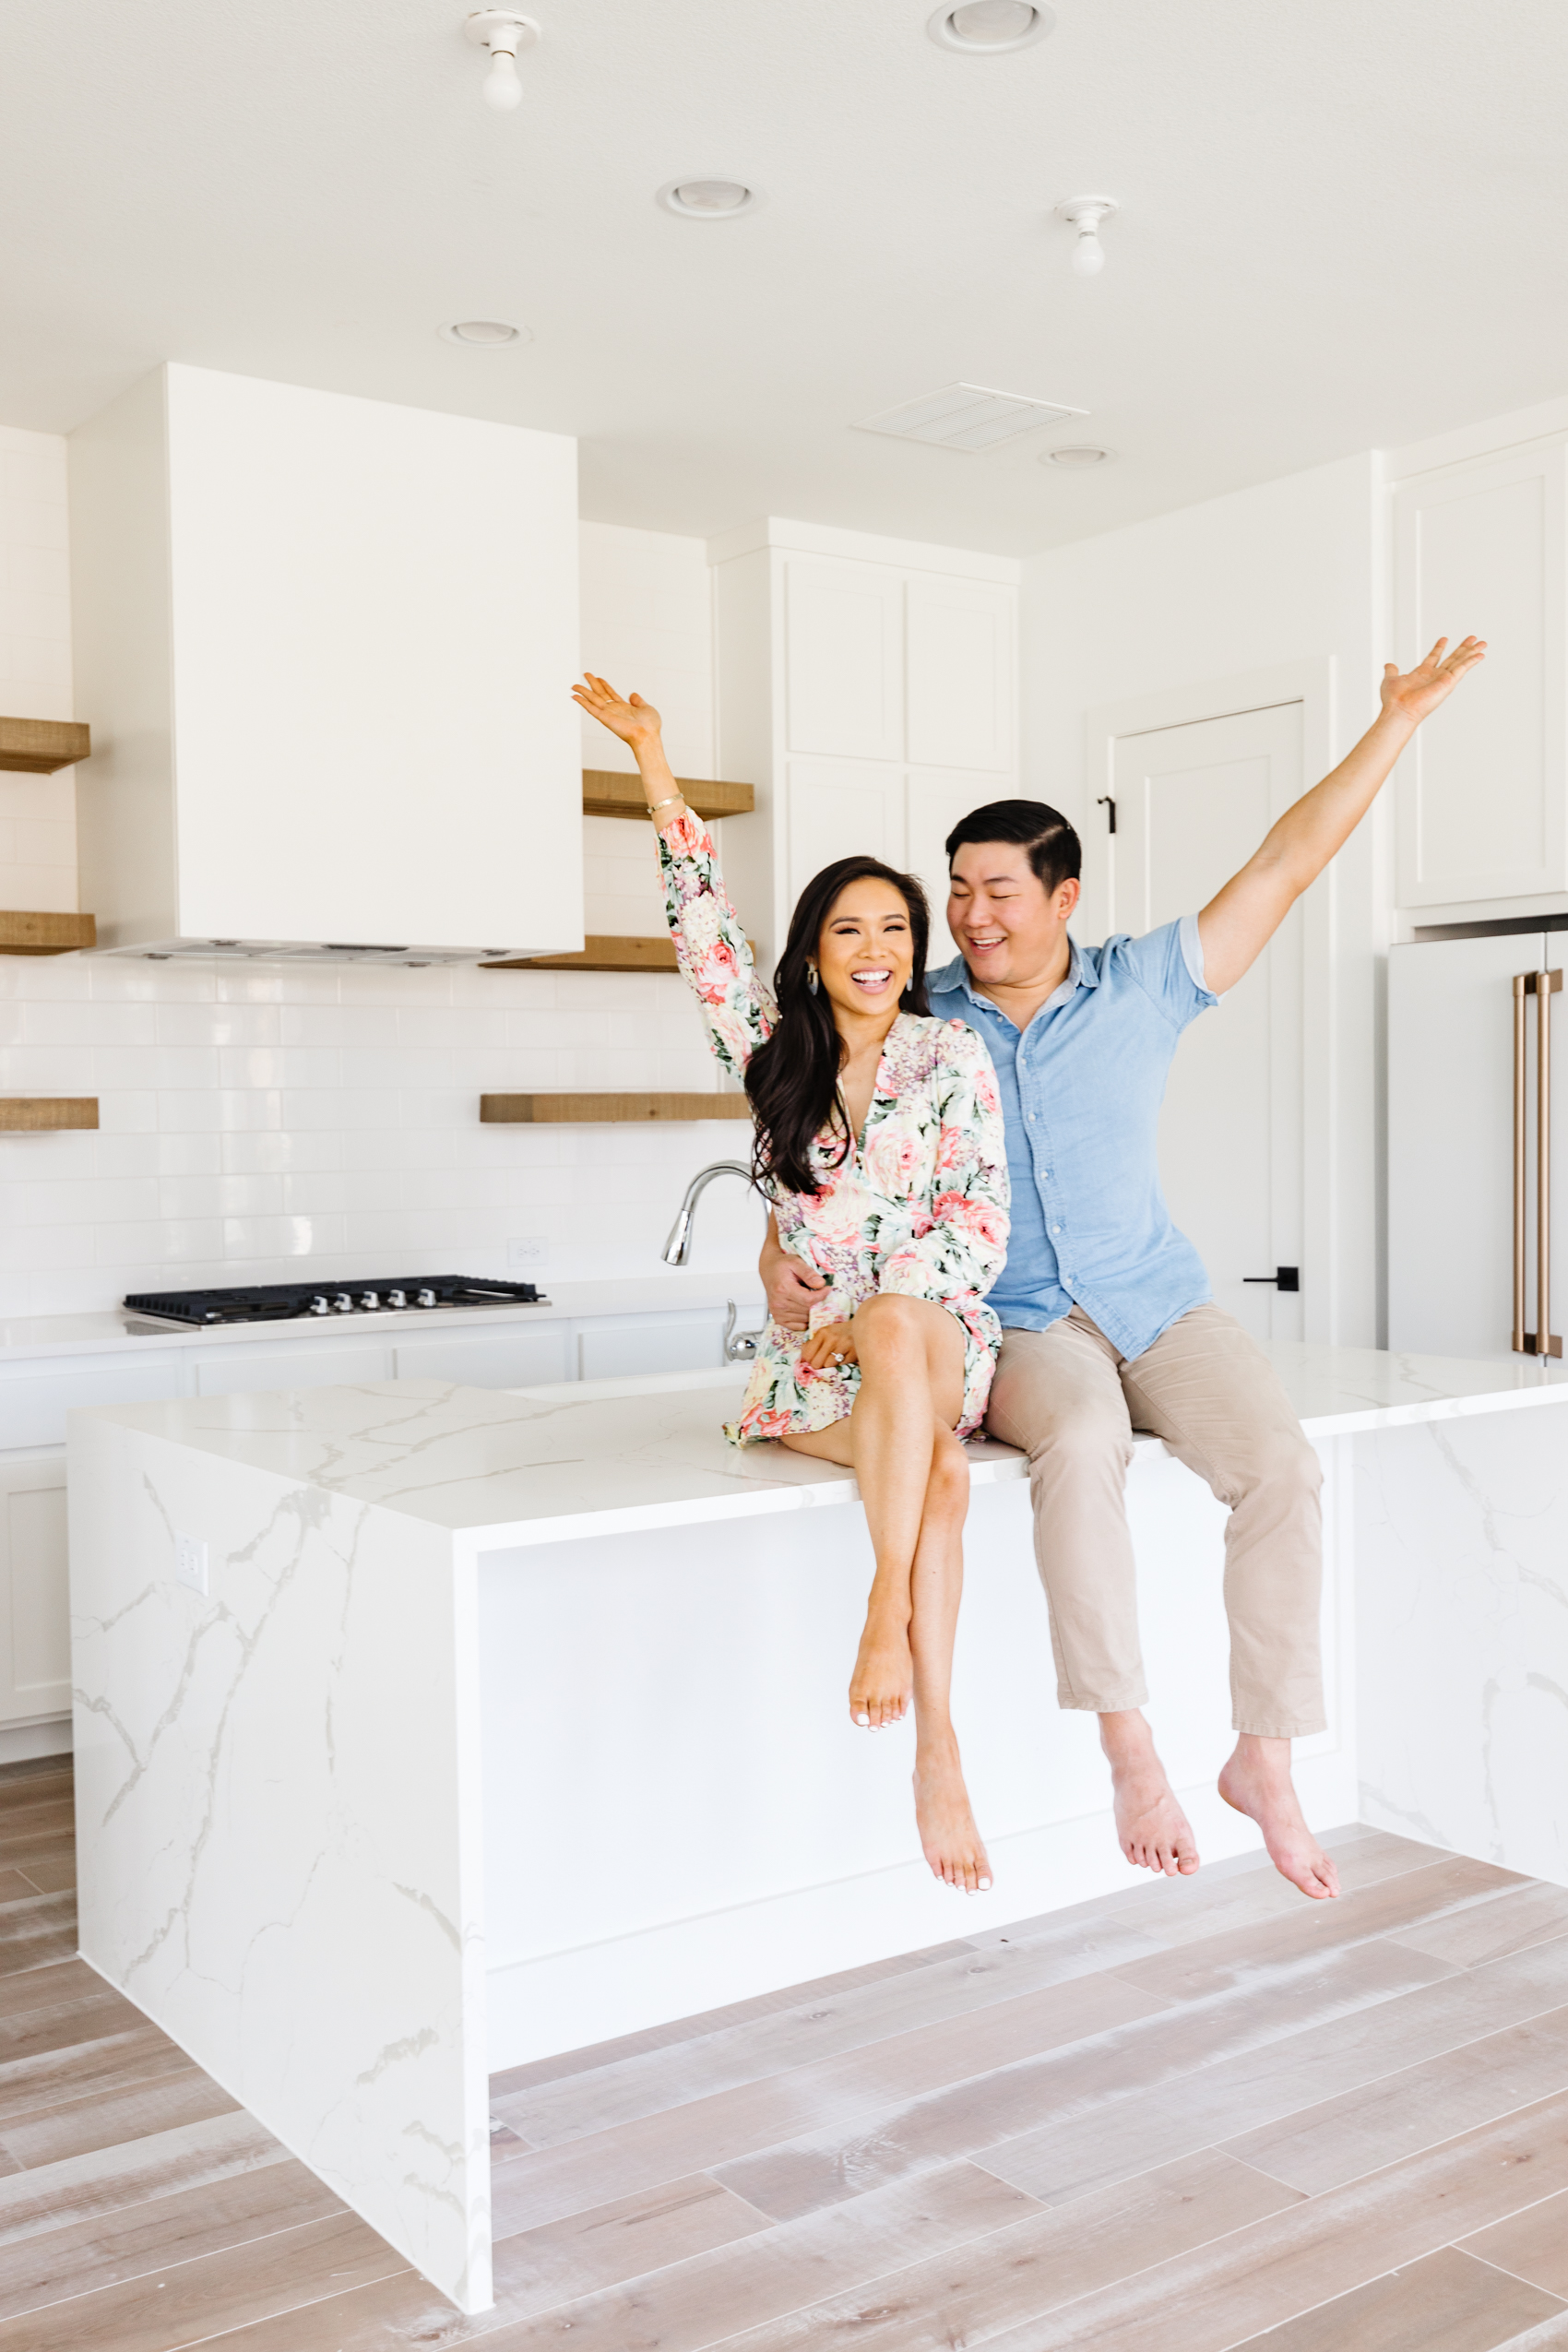 Hoang-Kim and Johnny in their new build home with a quartz waterfall island, custom range hood, open shelving and gold finishes in their kitchen